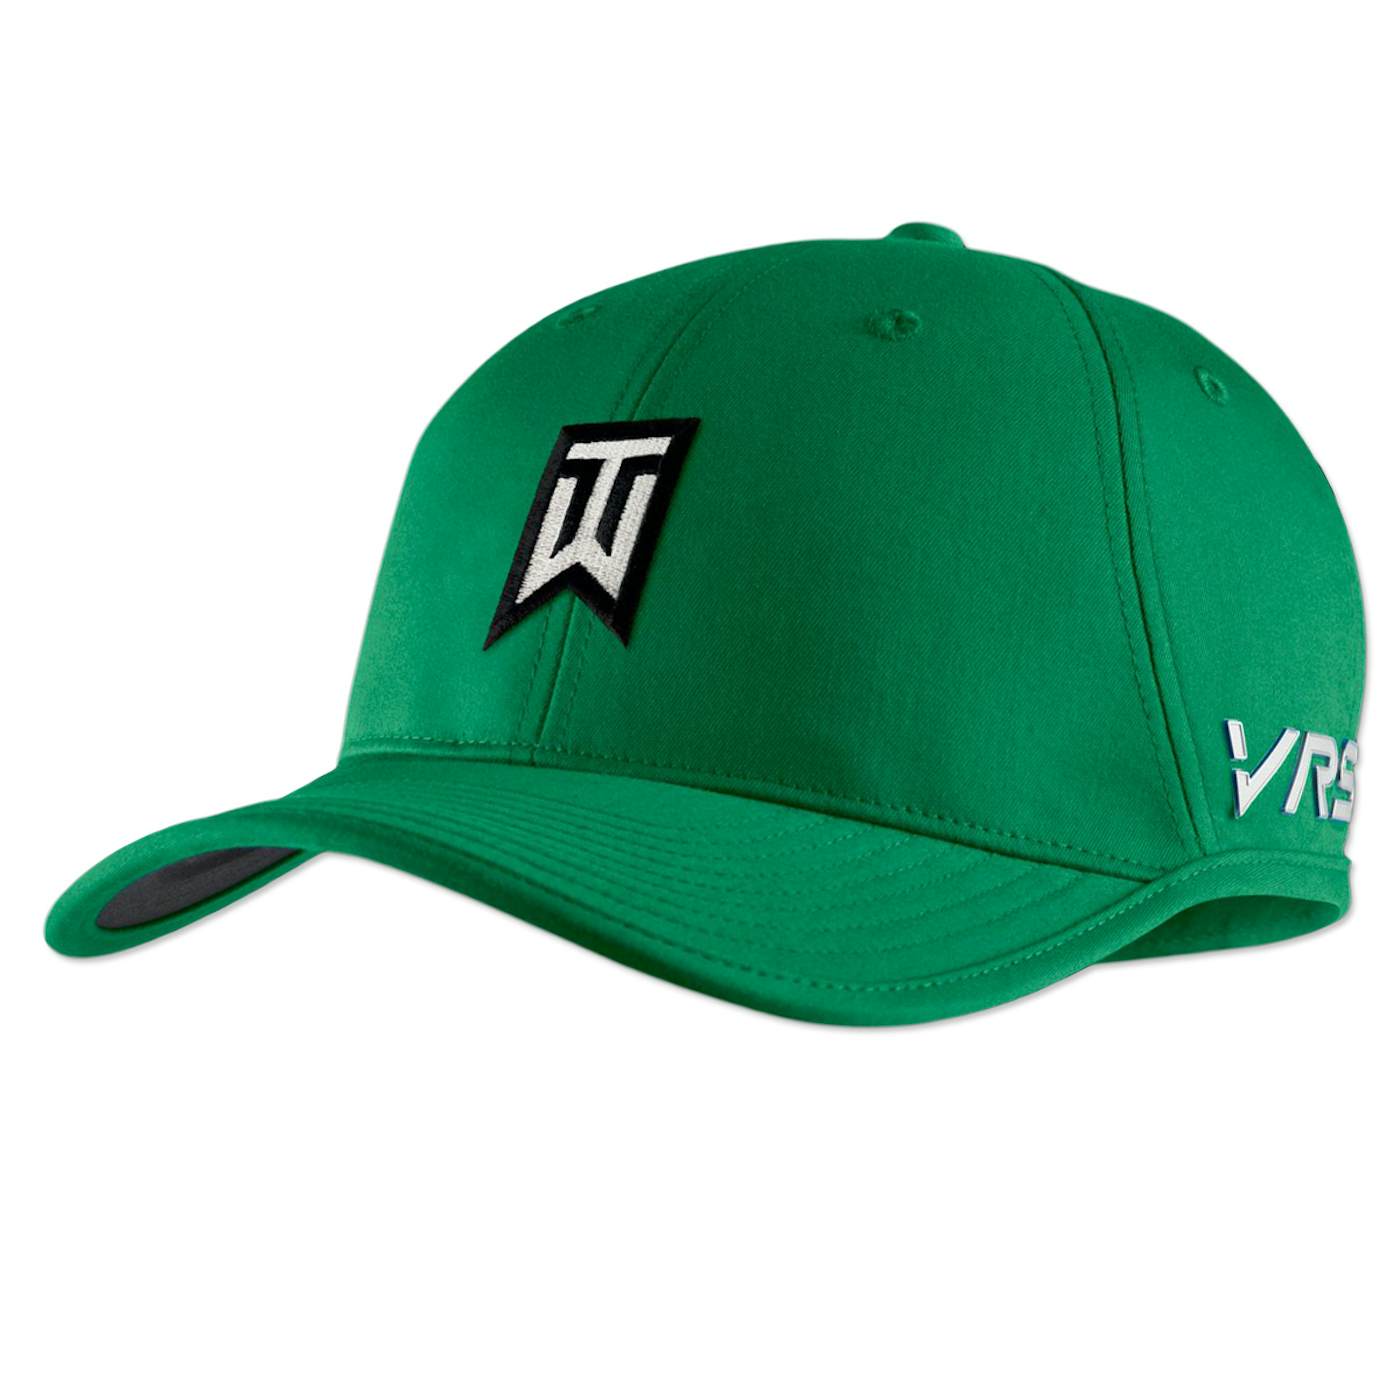 Tiger Woods Limited Edition Practice Cap